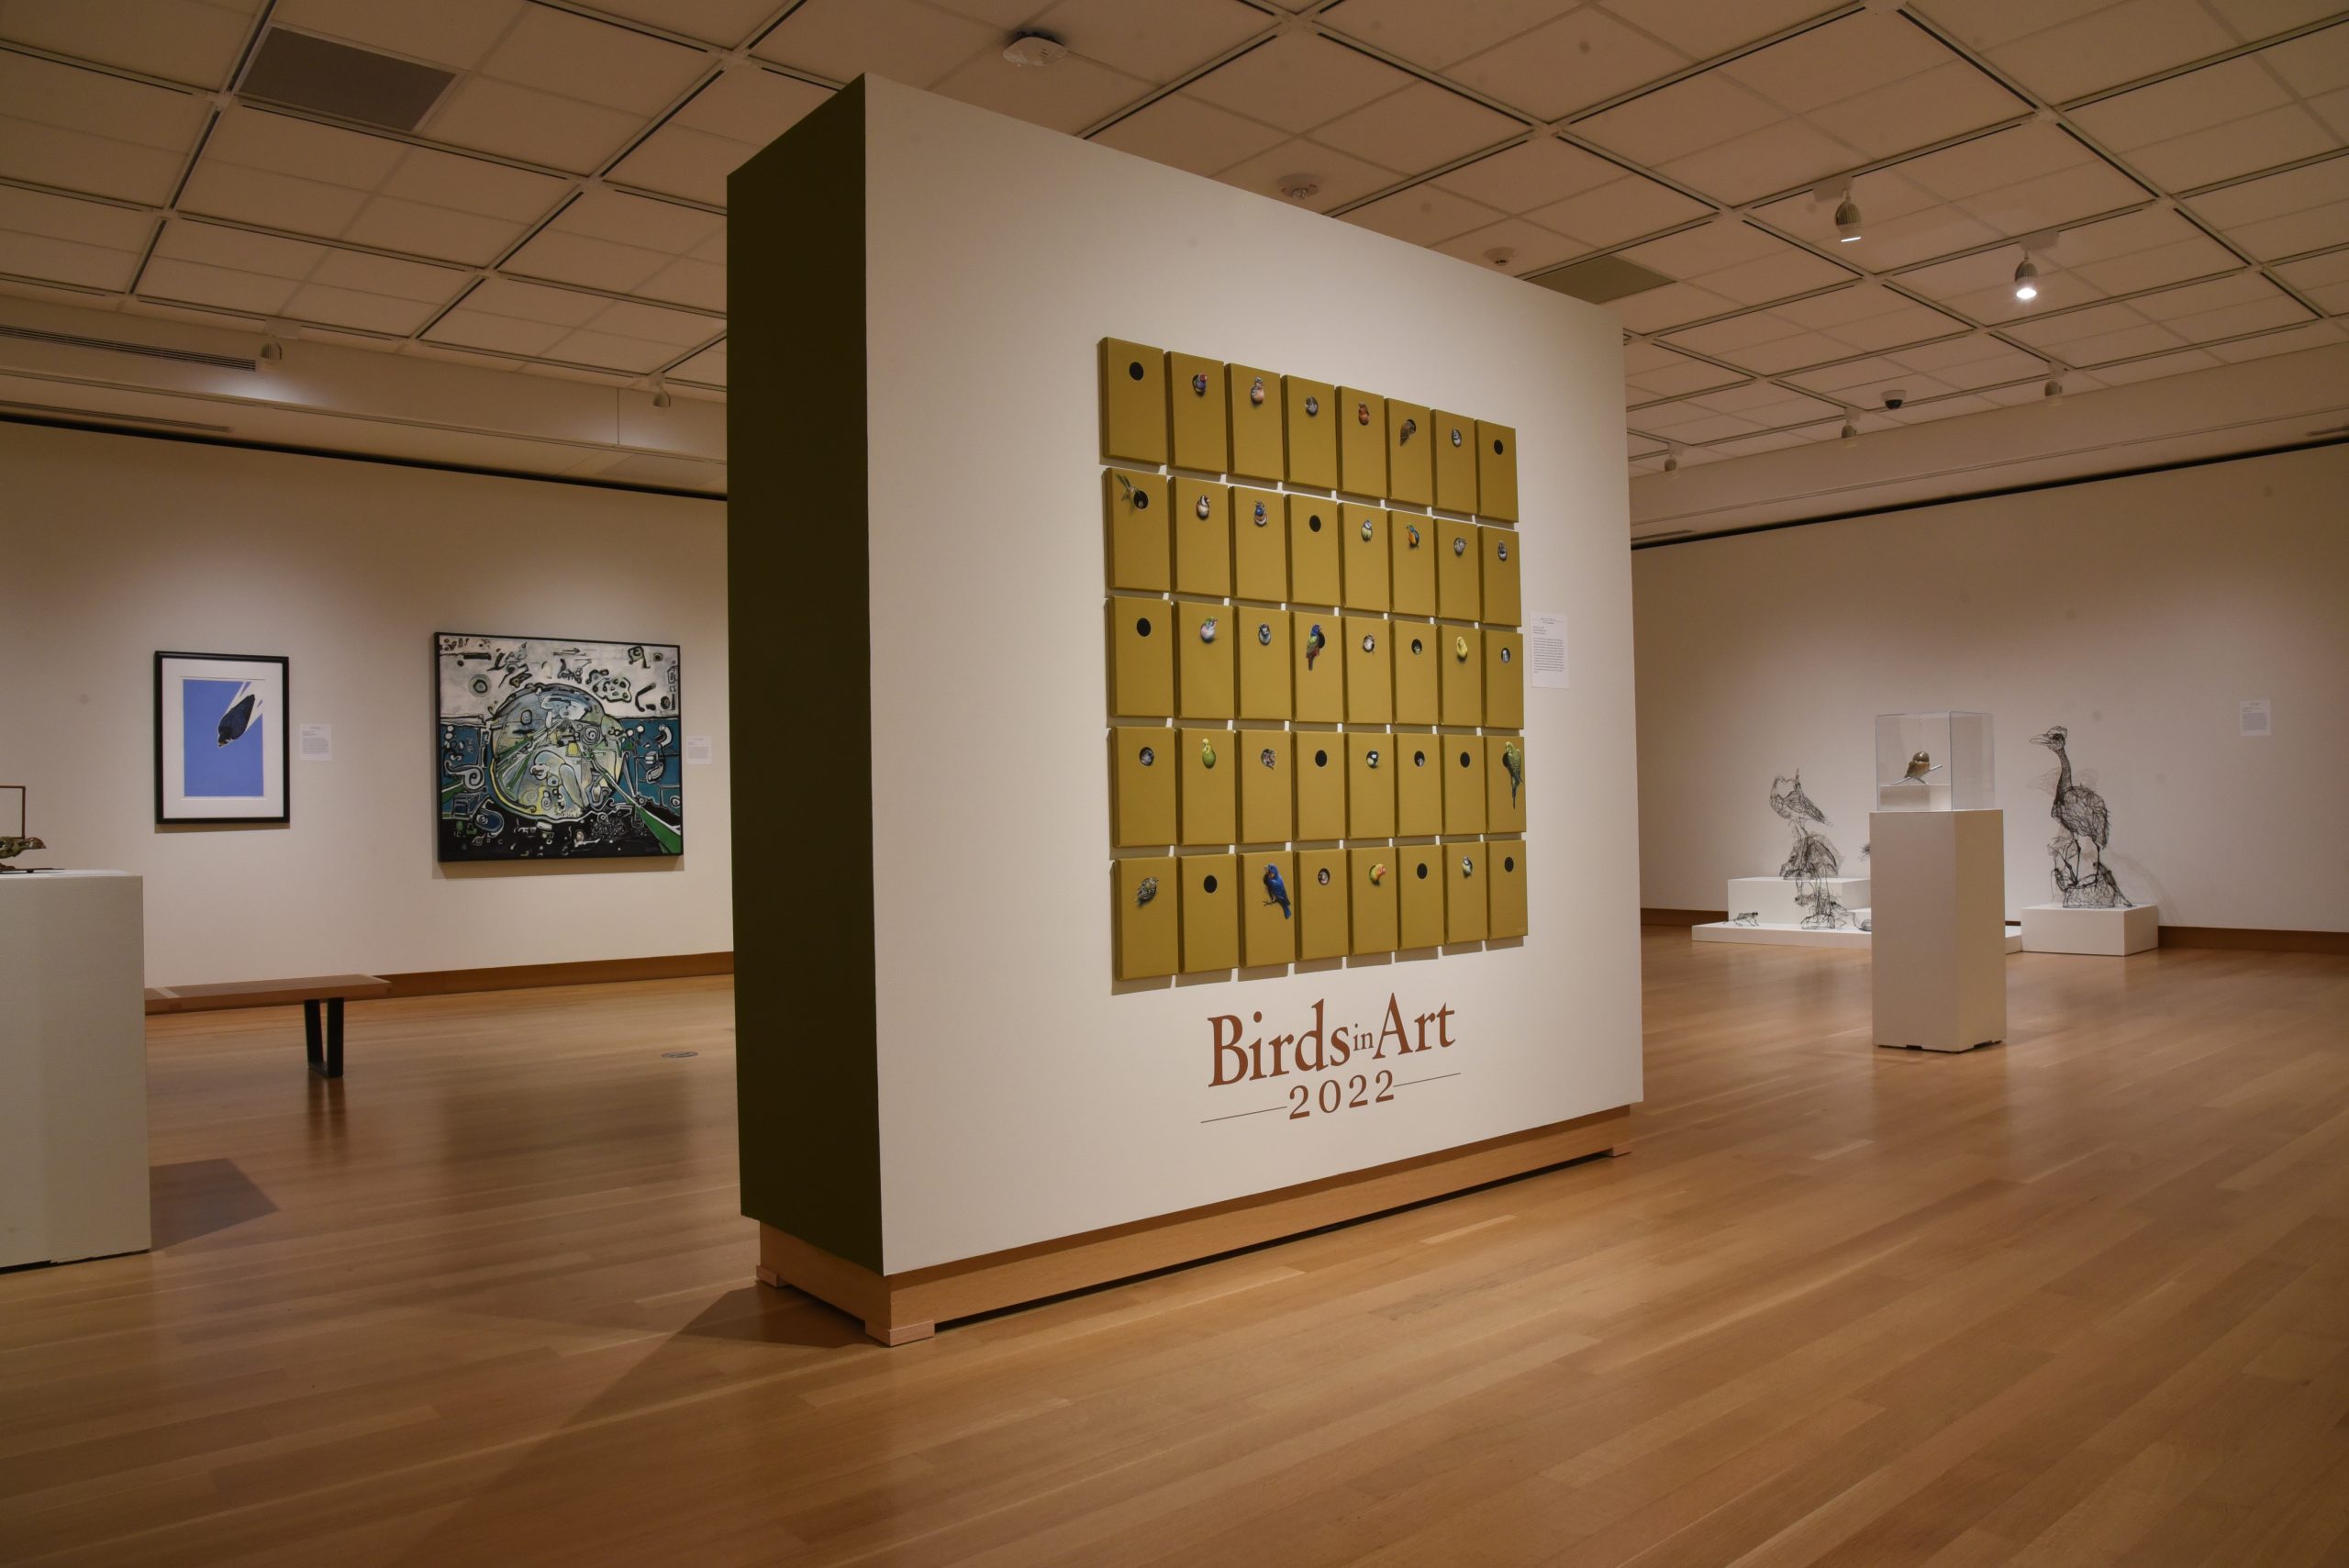 A gallery view depicts paintings, sculptures, and prints from Birds in Art 2022. Marcel Witte's Multicultural is featured center frame, with 40 panels painted like birdhouses and various birds perched or looking out. 